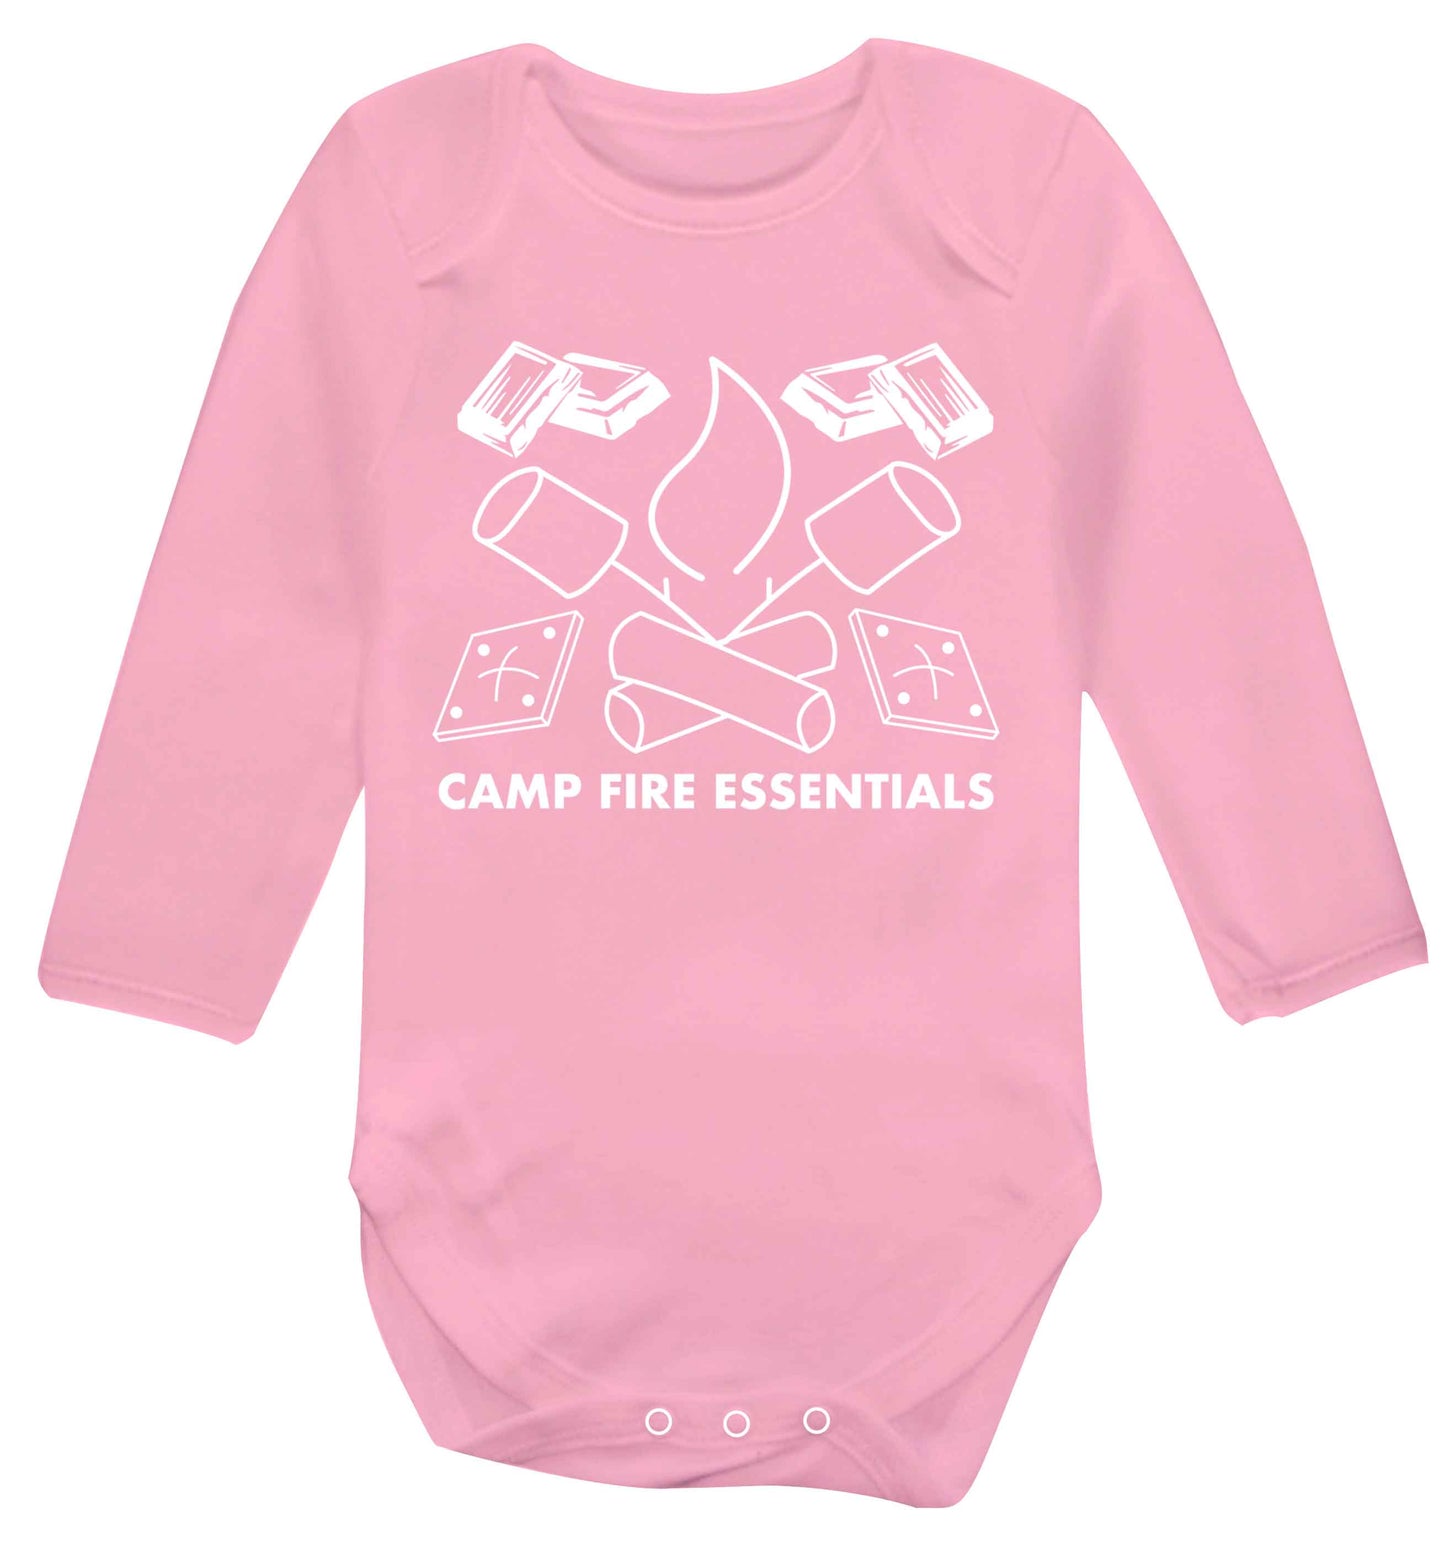 Campfire essentials Baby Vest long sleeved pale pink 6-12 months